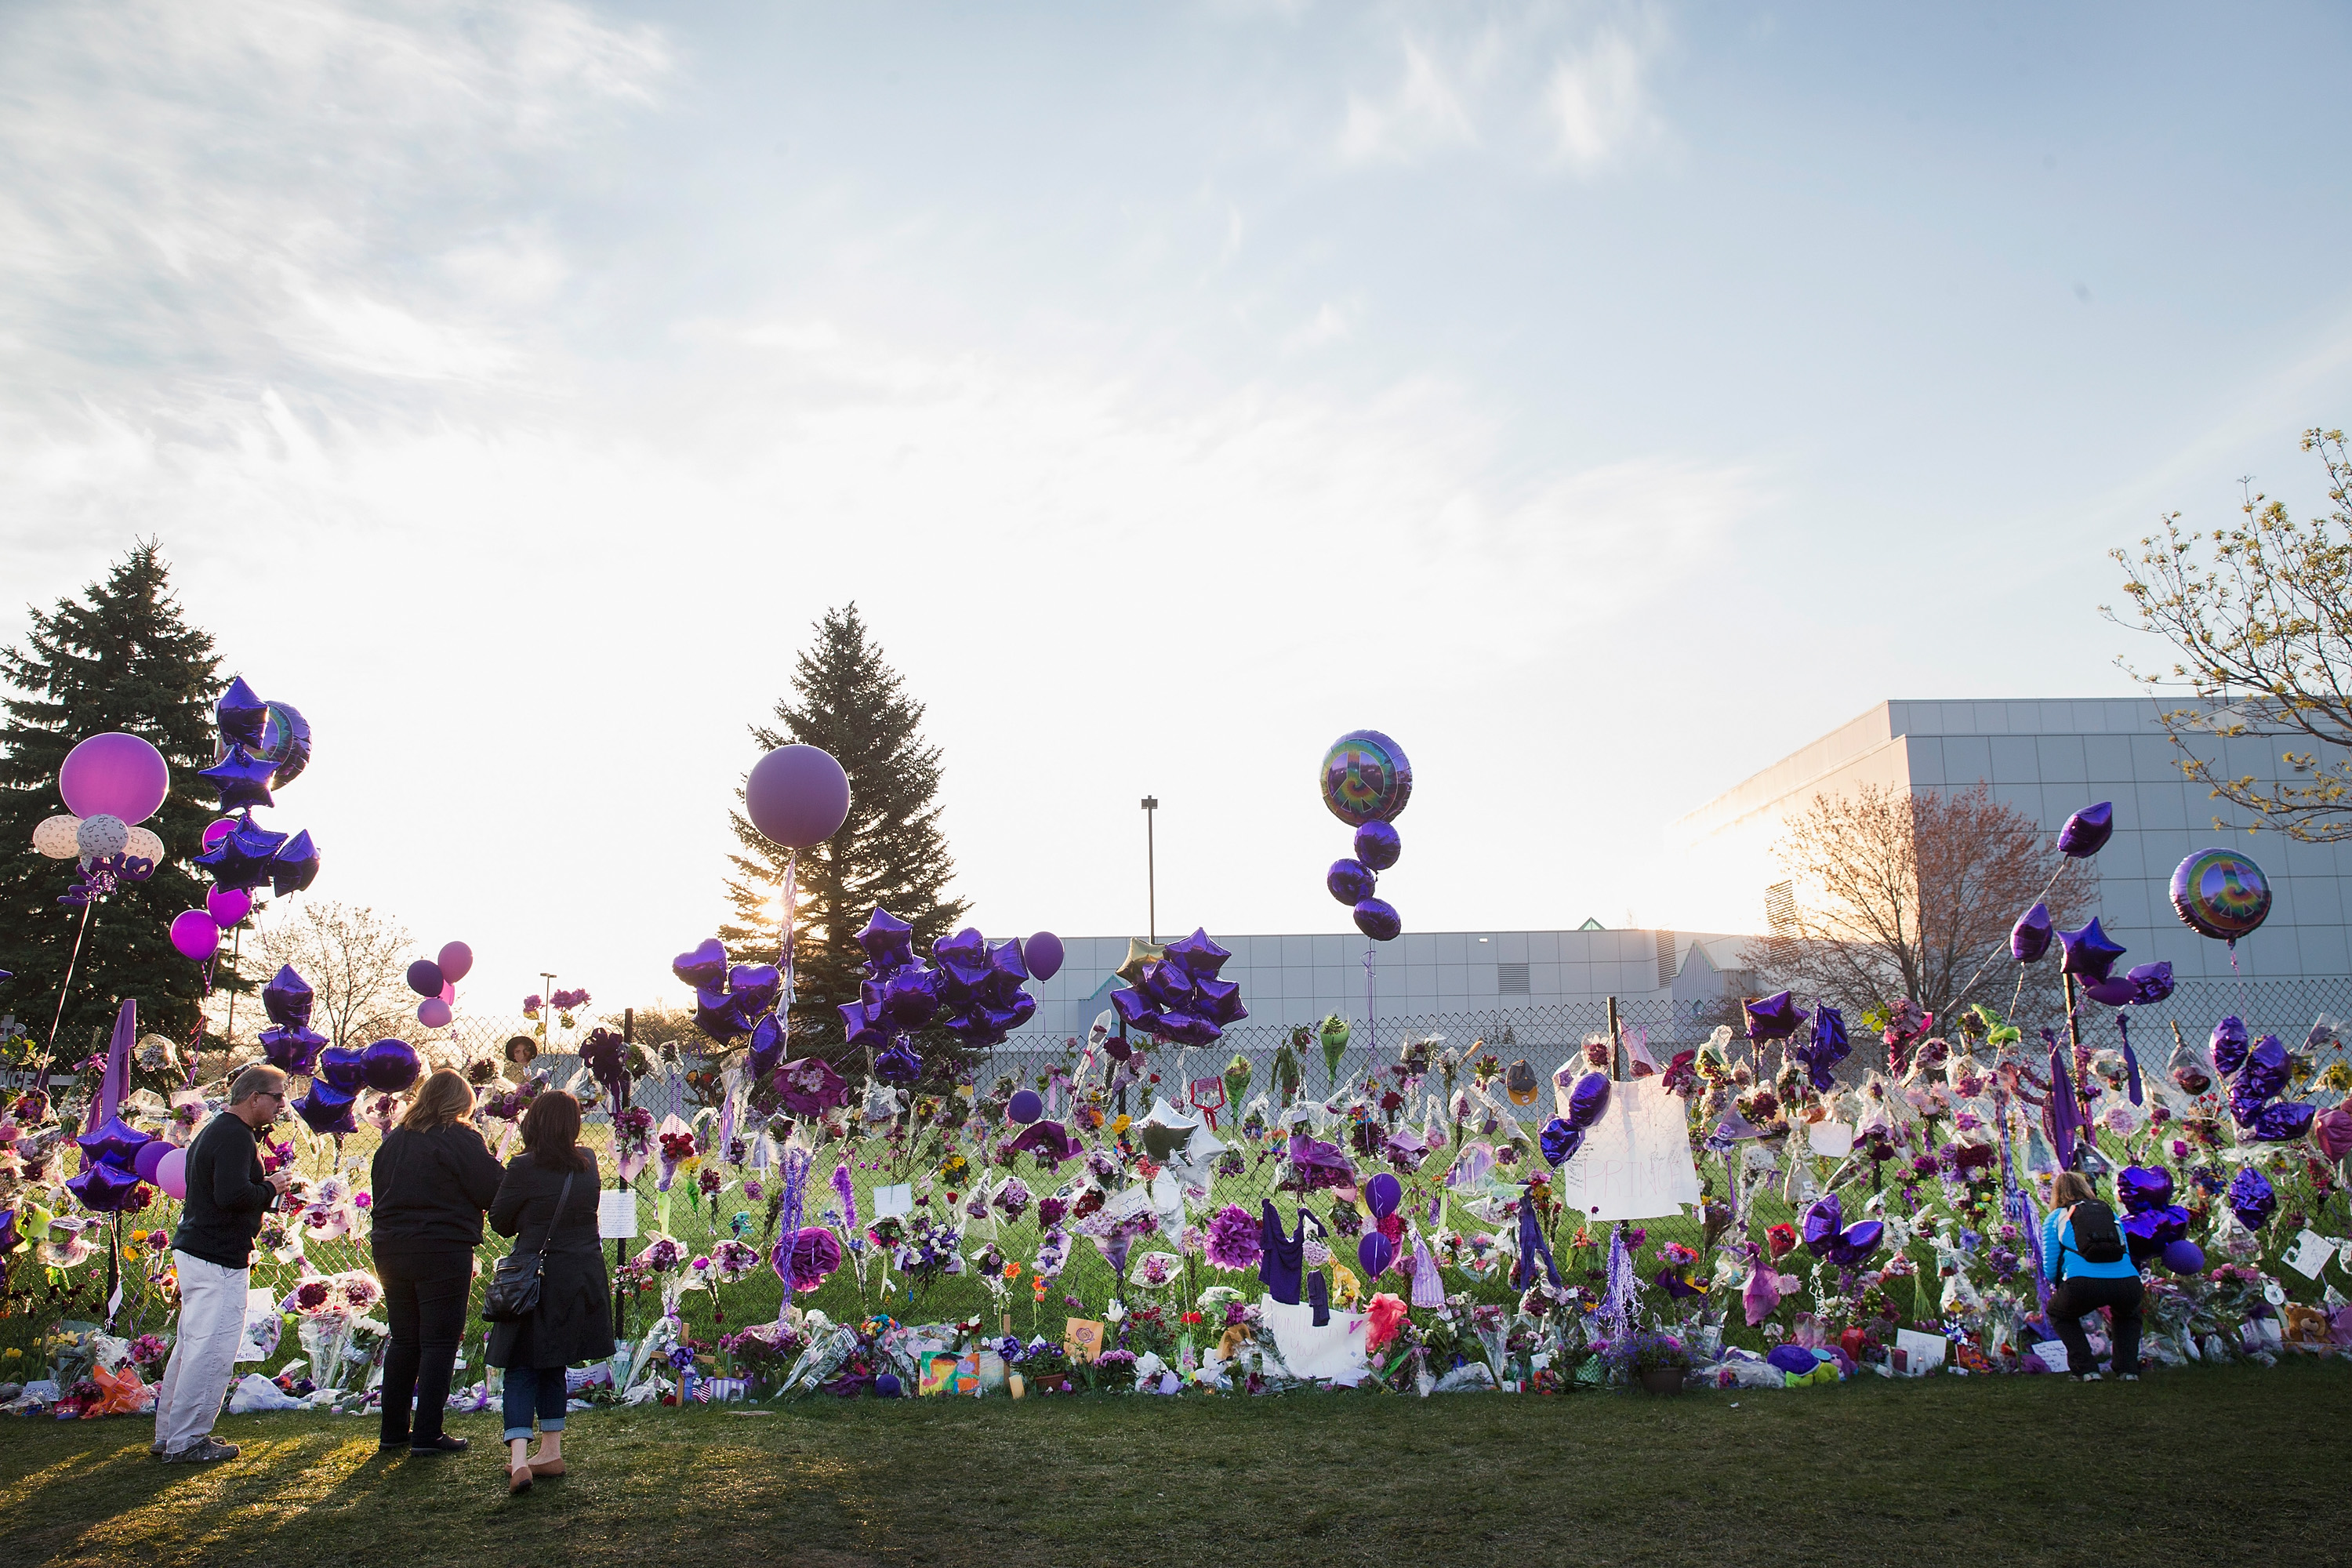 Prince's fans visit his memorial outside Paisley Park, in Chanhassen, Minnesota on April 23, 2016 | Source: Getty Images